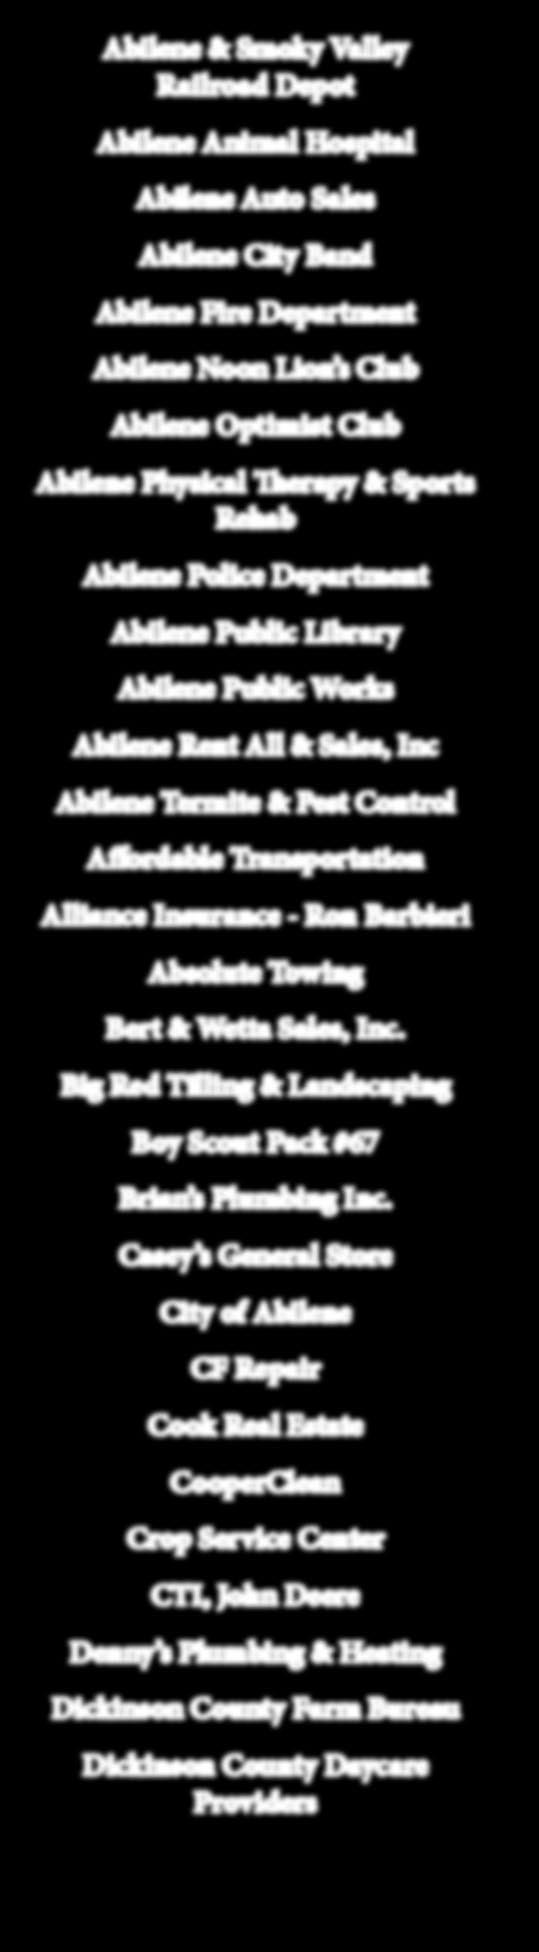 The Abilene Parks & Recreation Department would like to thank the following sponsors for their hard work and generous donations that help to make our community successful.